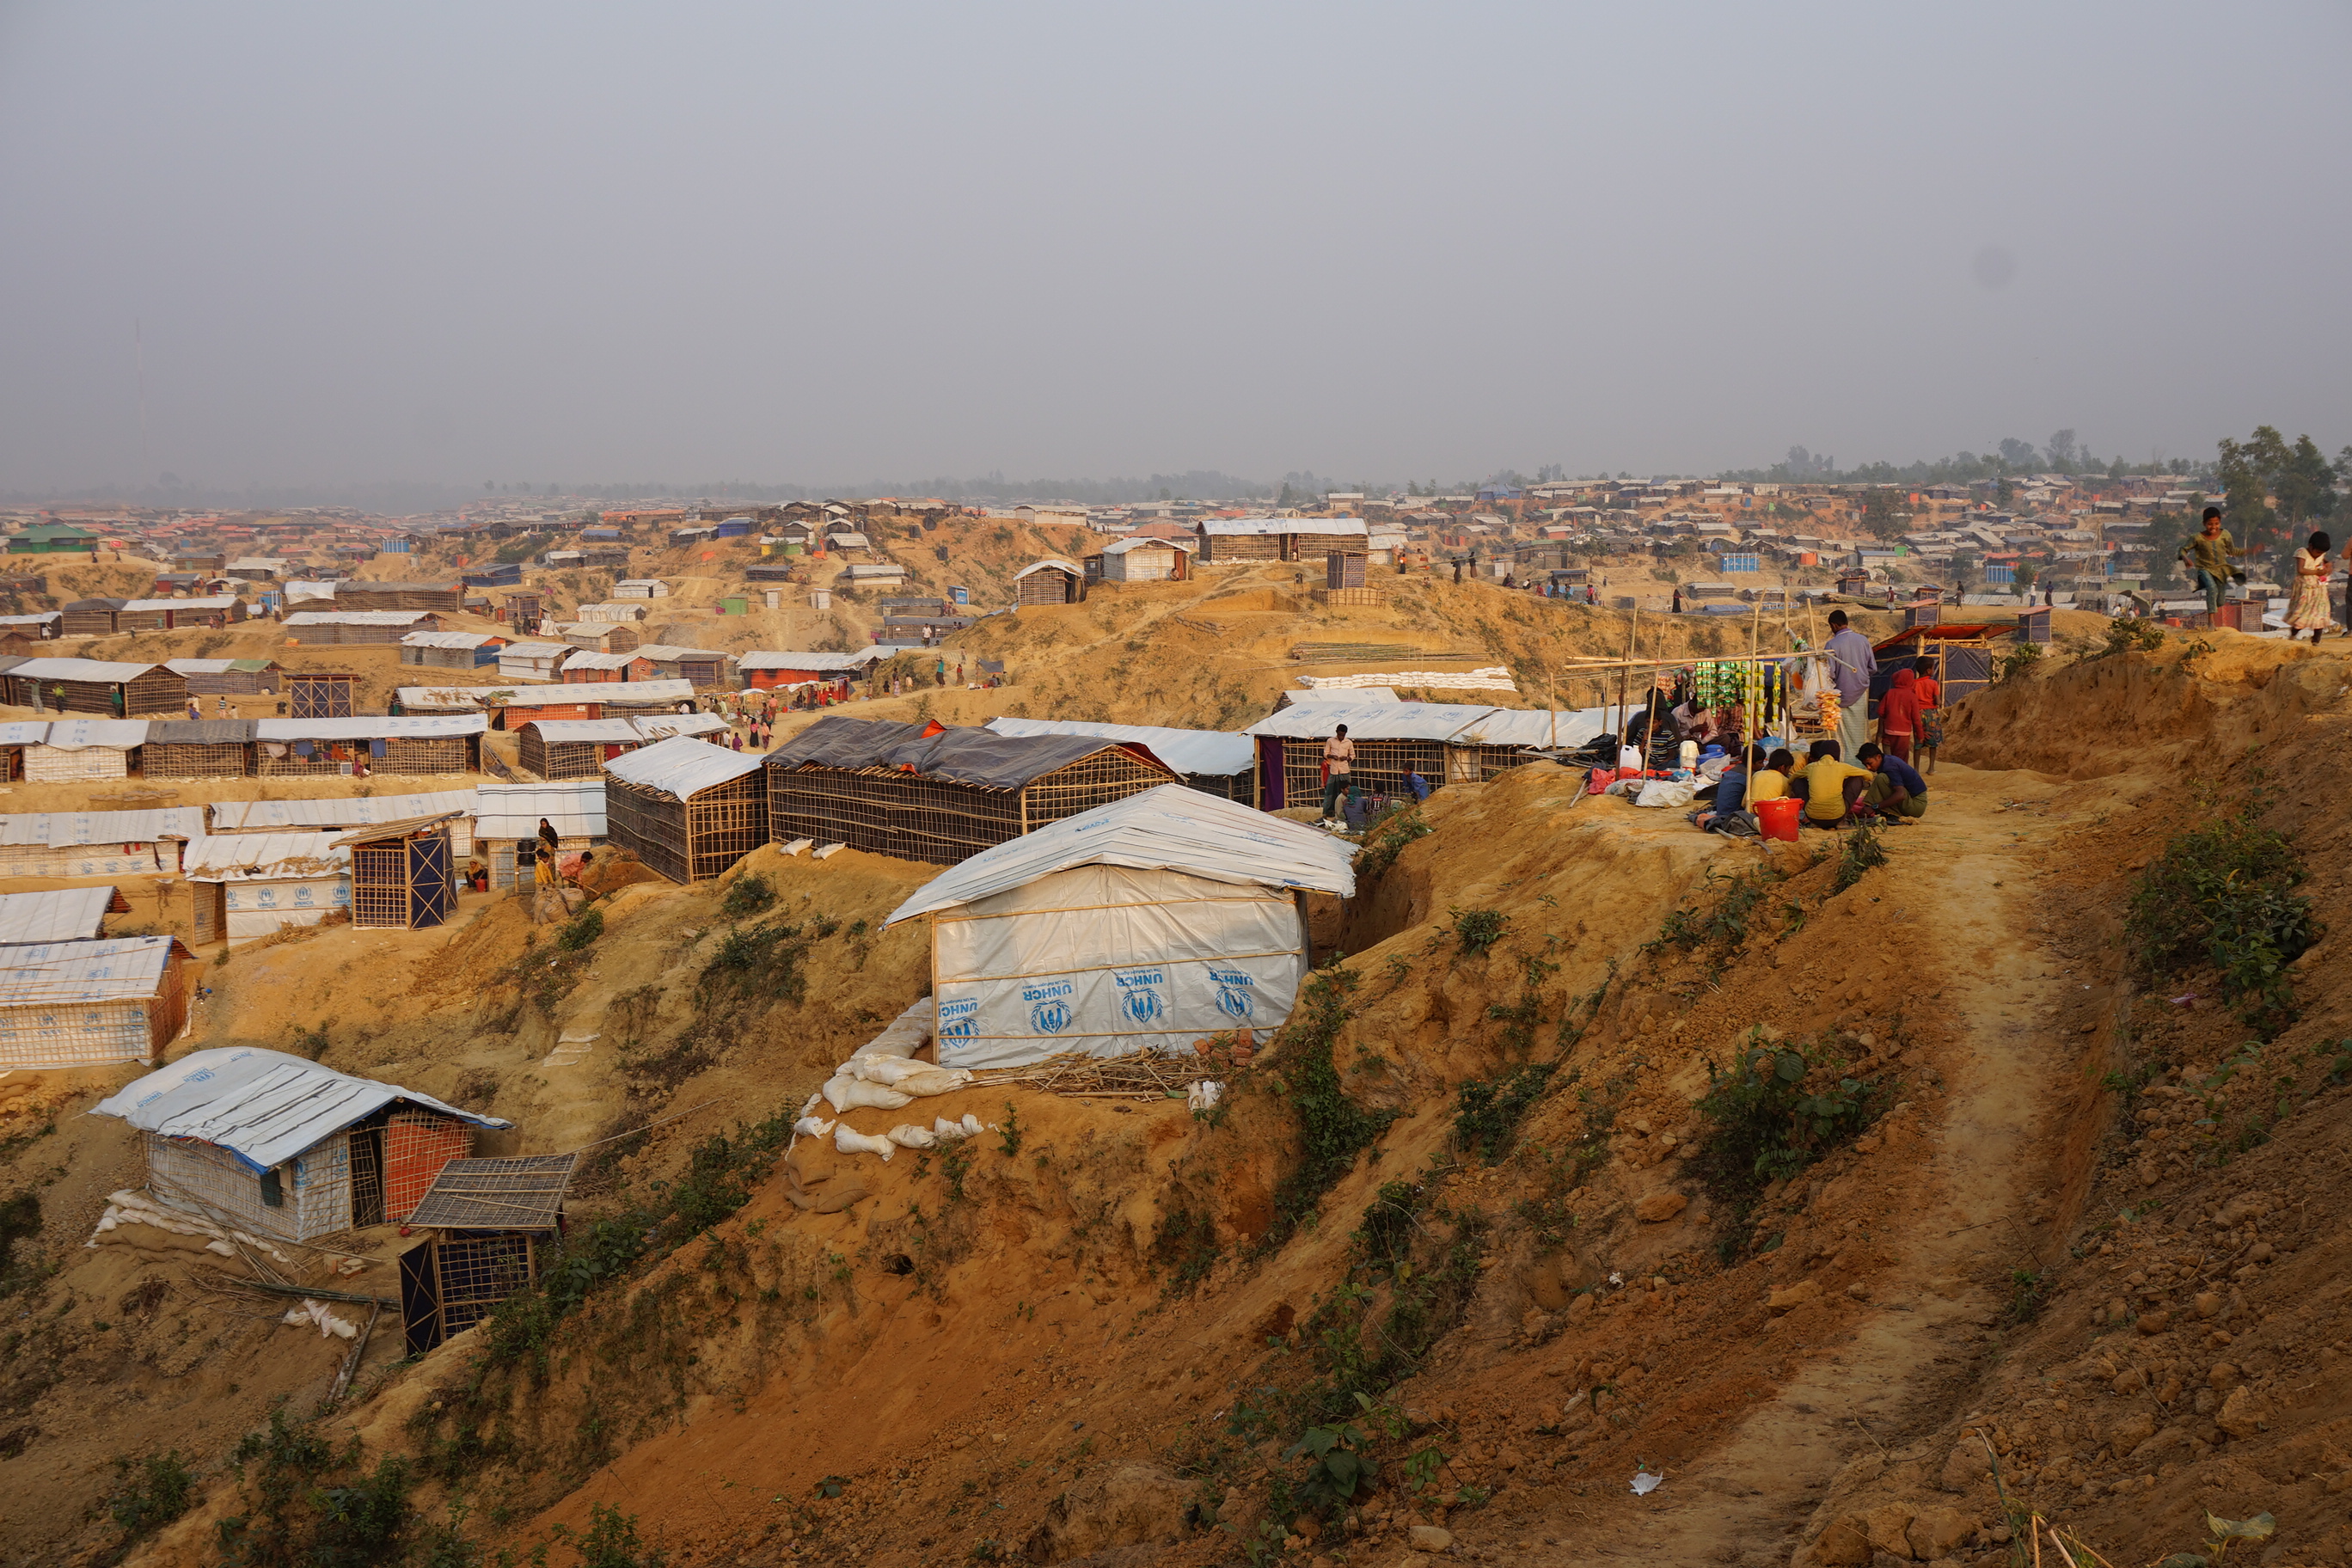 View of hilly refugee camp